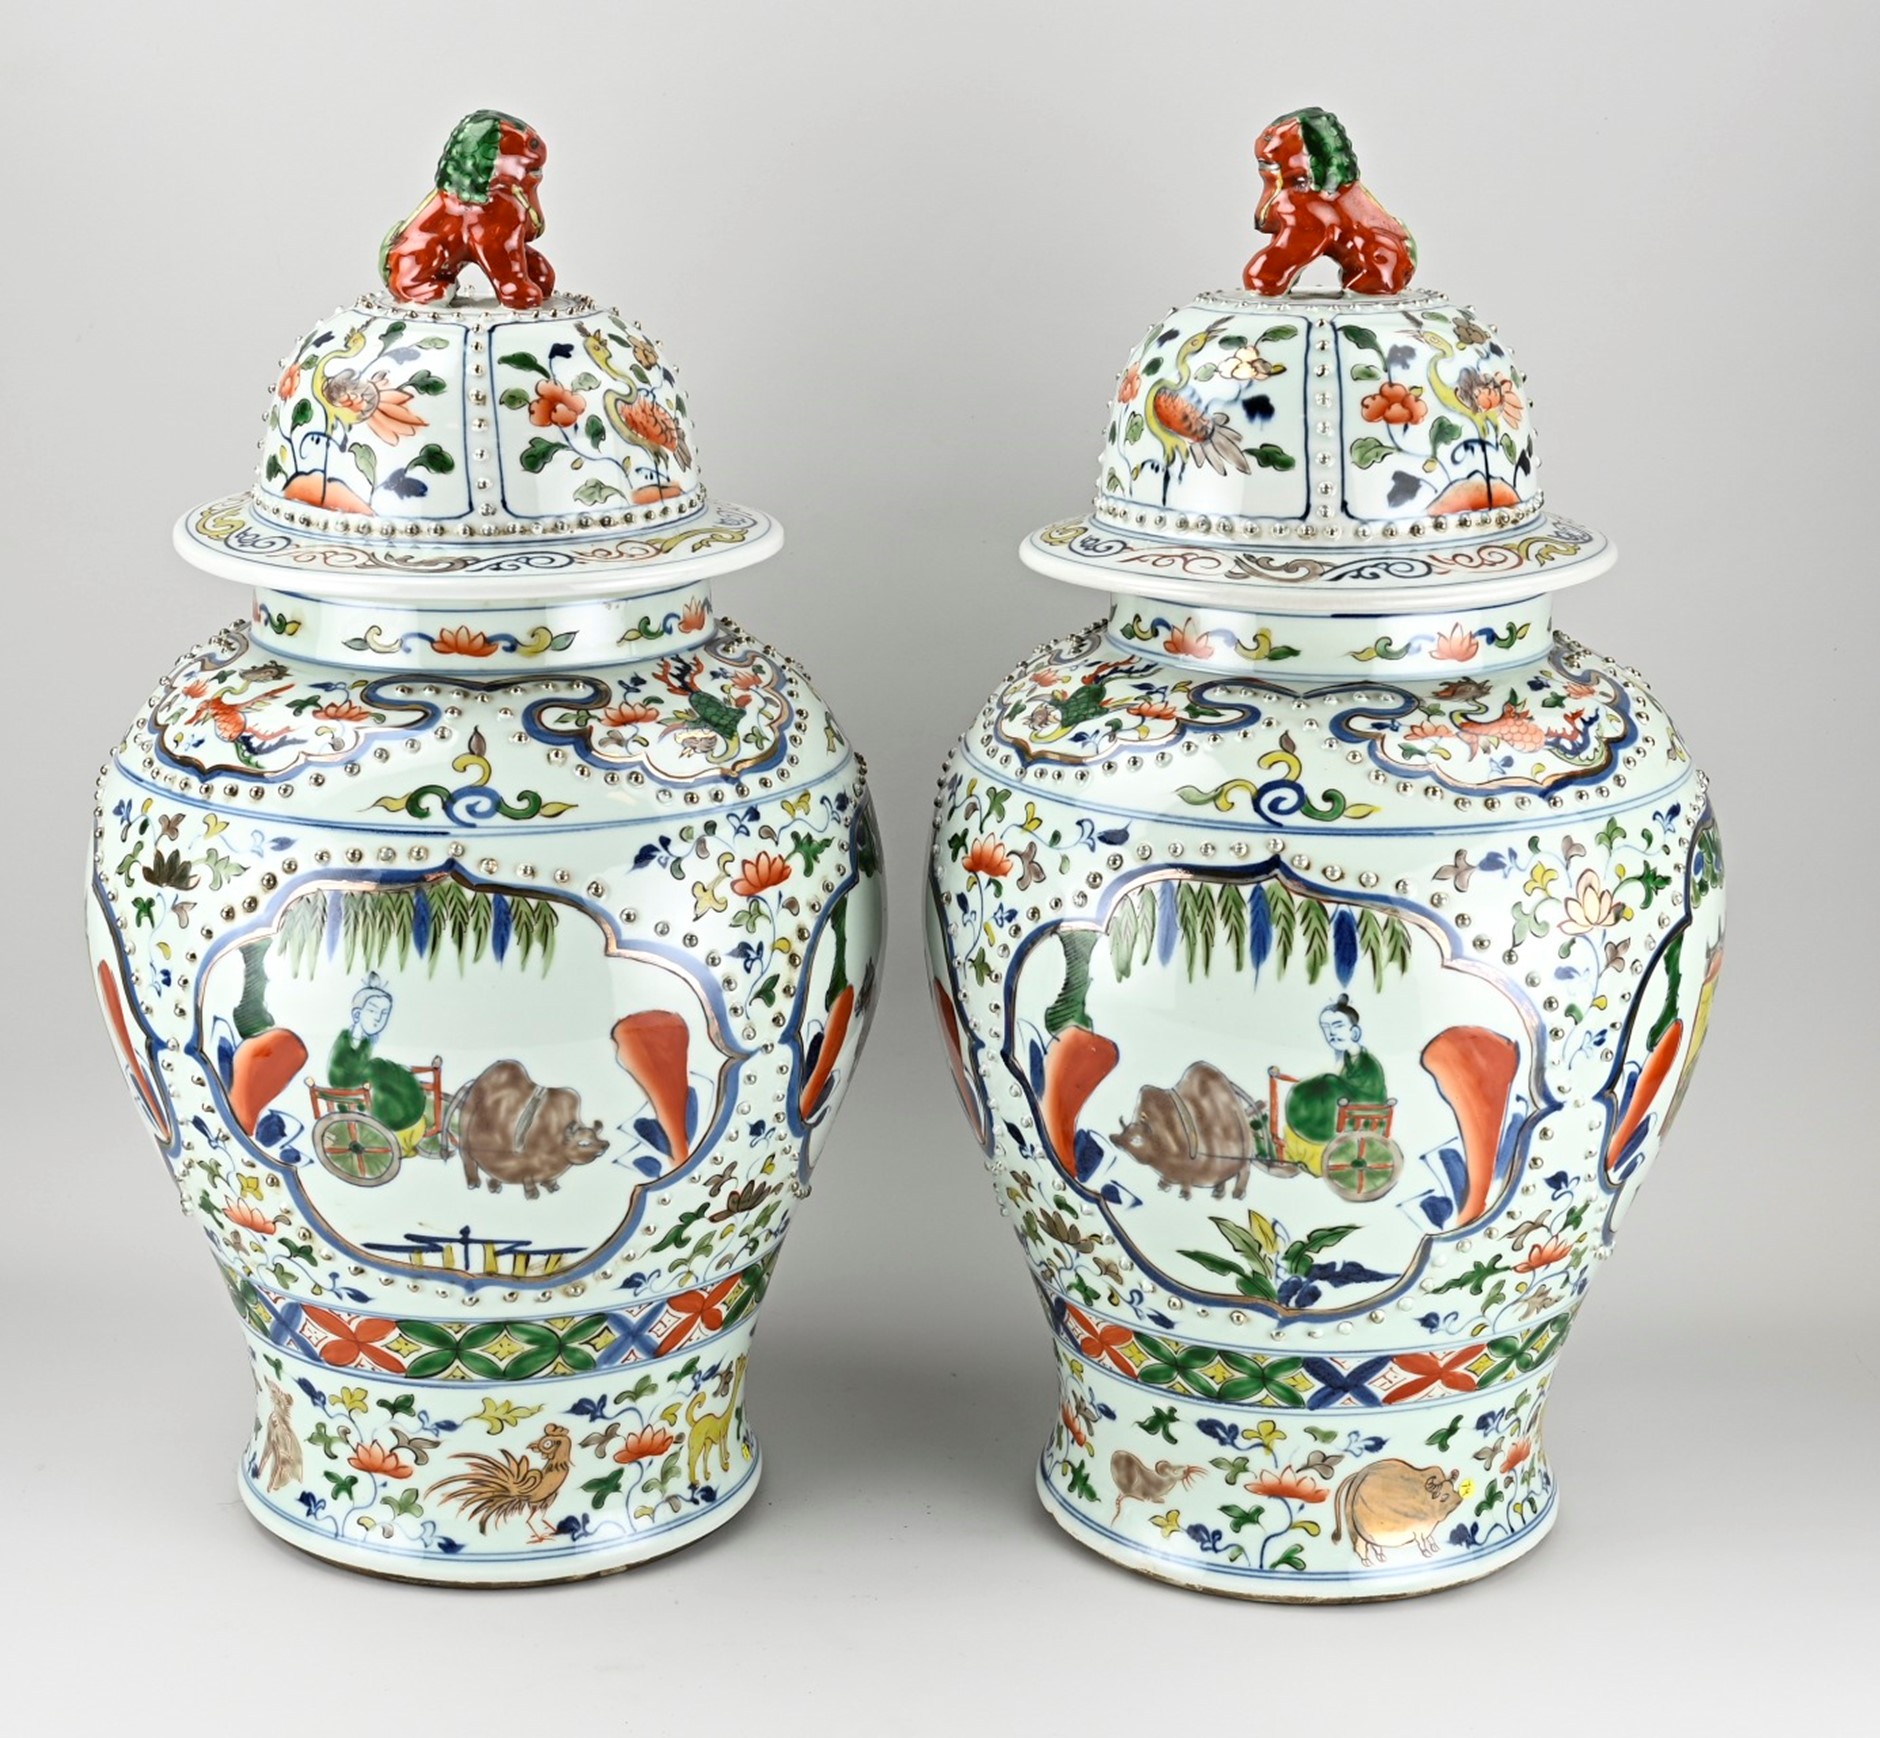 Two Chinese dekselvases